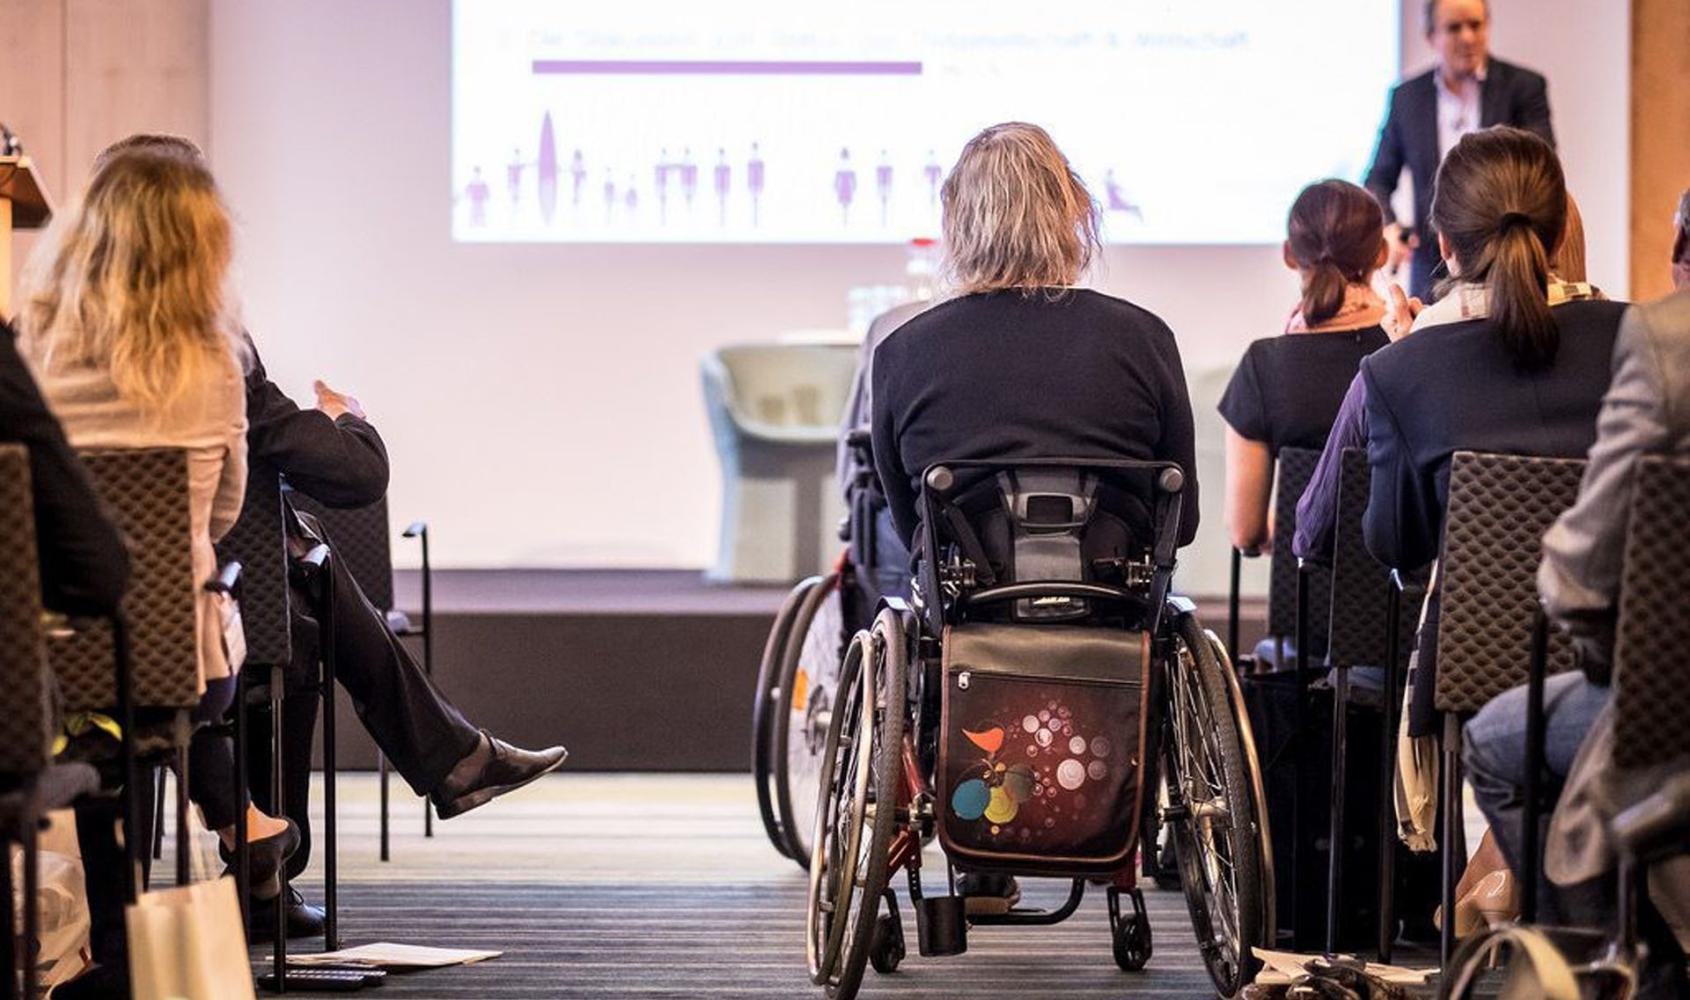 A group of people attending a lecture with a presenter on stage with a slide projecting on screen. In the audience are two wheelchair-users and audience members in chairs.